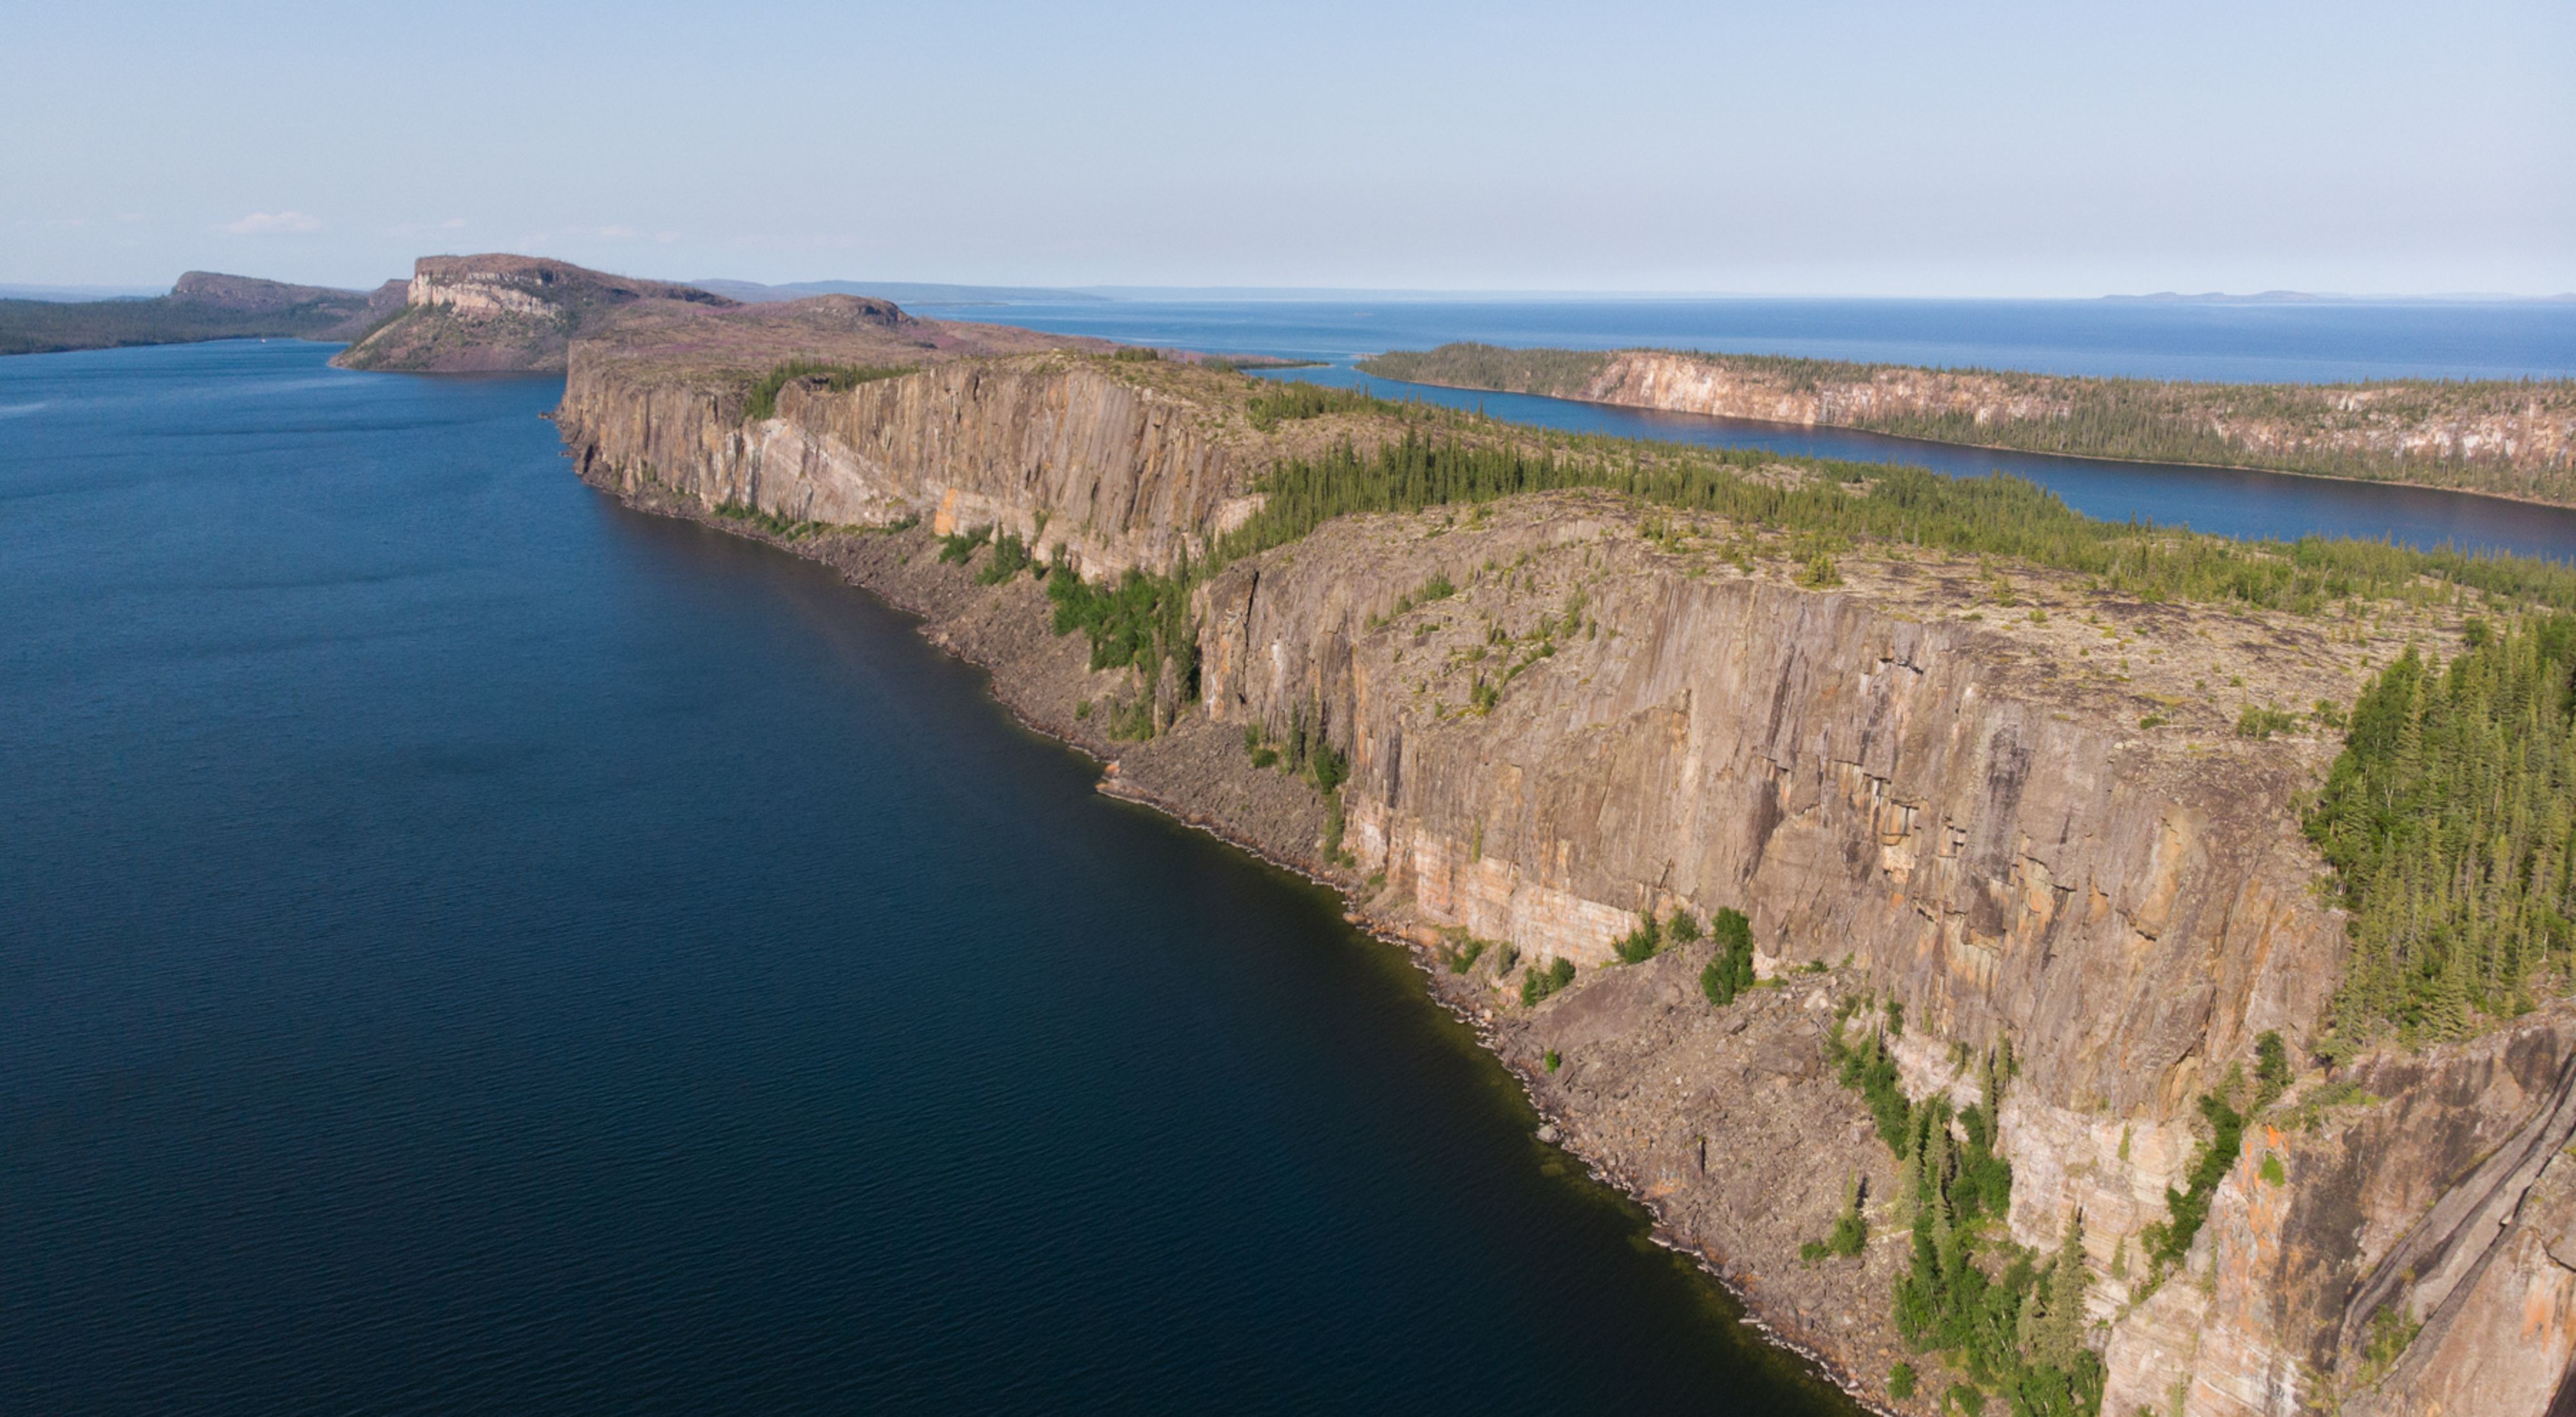 Cliffs of the Pethei Peninsula overlooking Great Slave Lake in the Northwest Territories.